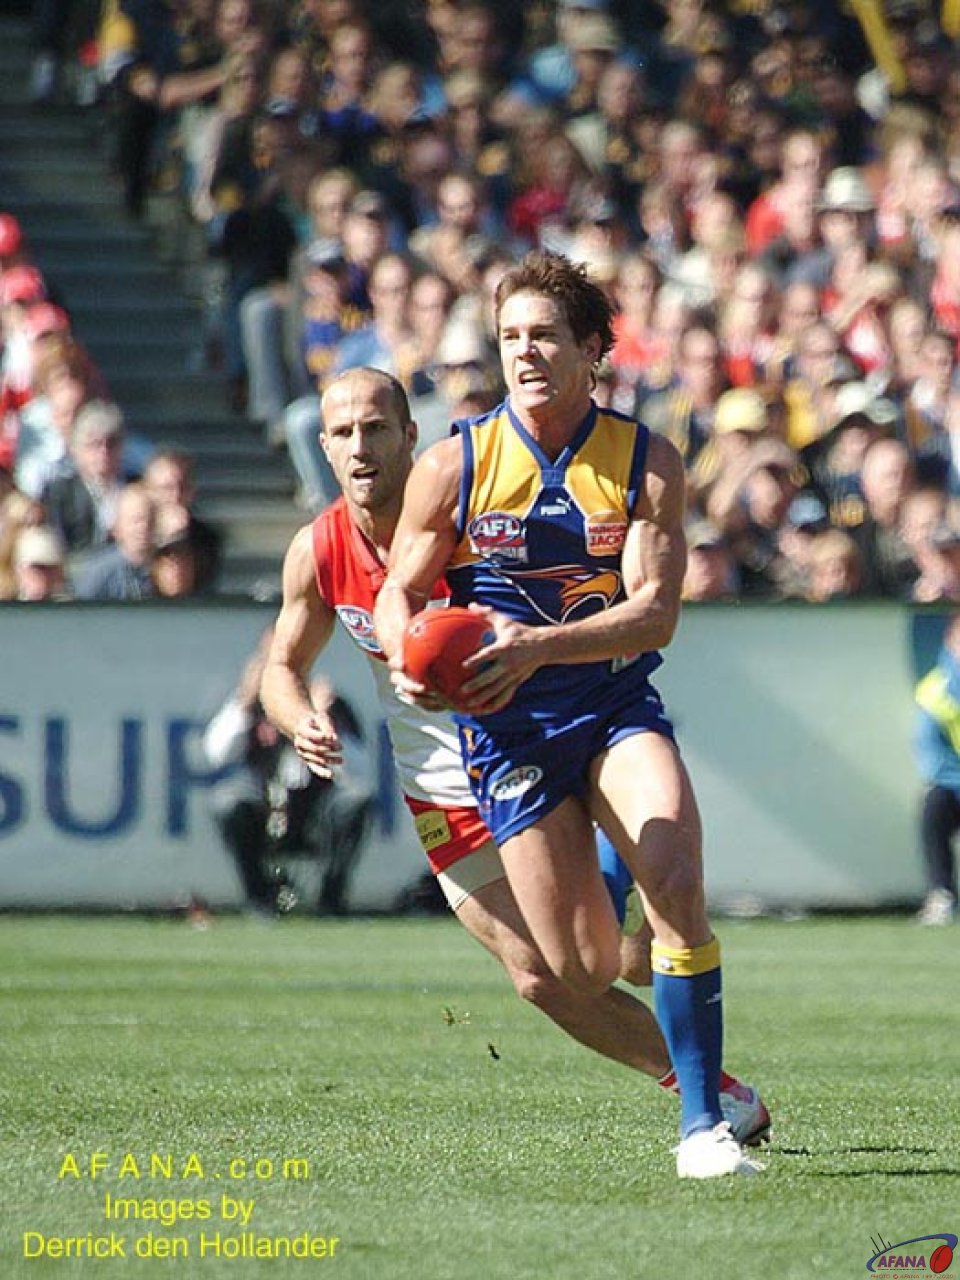 [b]The Eagle's Ben Cousins about to drive the team forward early in the match[/b]